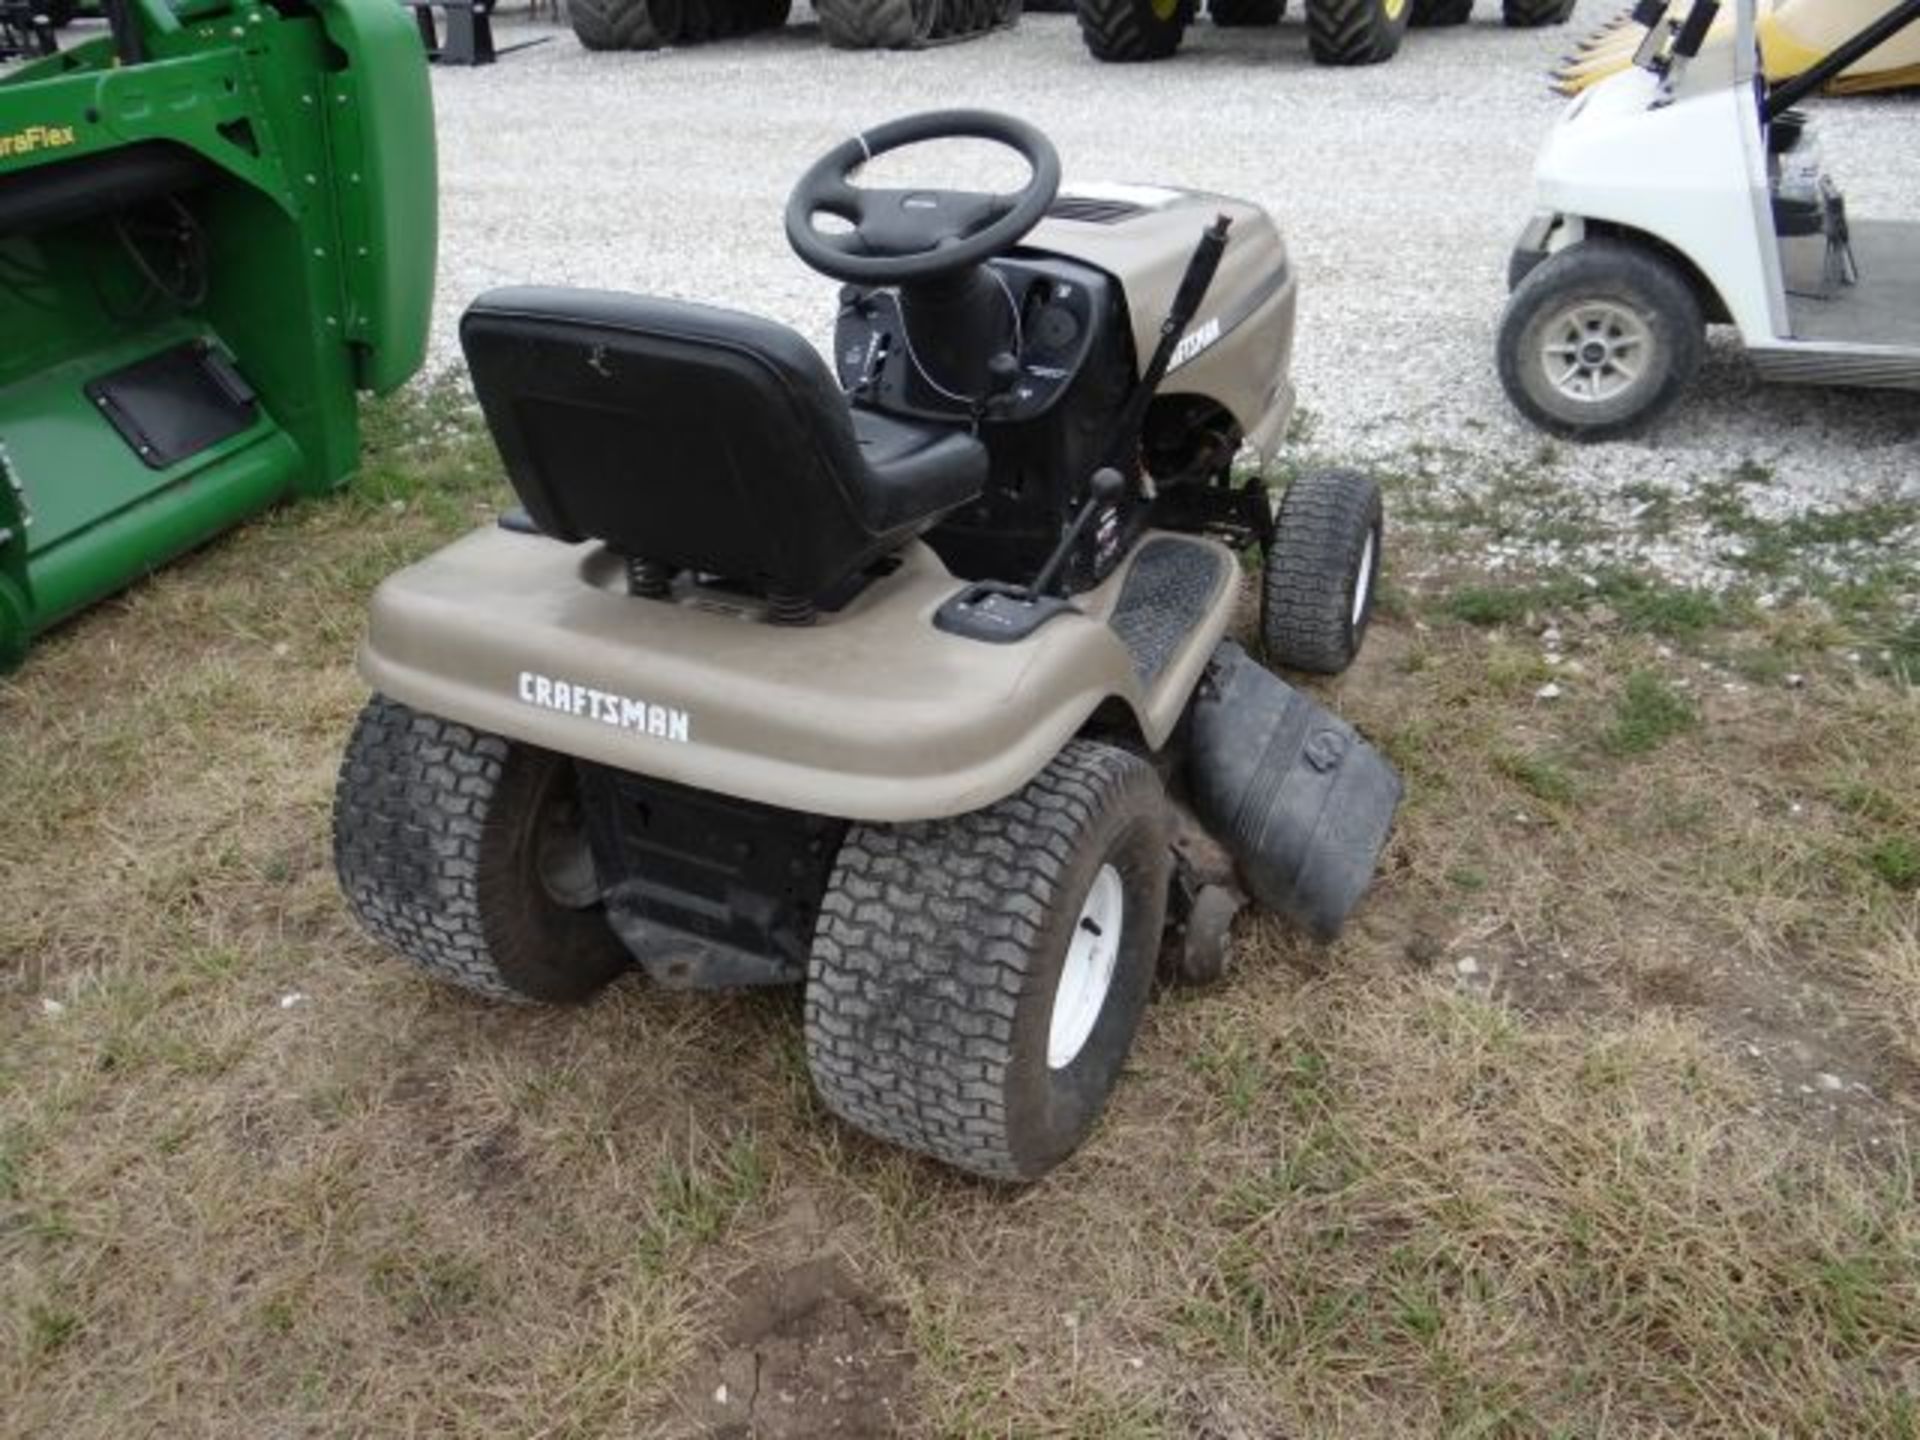 Sears Riding Mower 42" Deck, New Battery, Manual in the Shed - Image 3 of 3